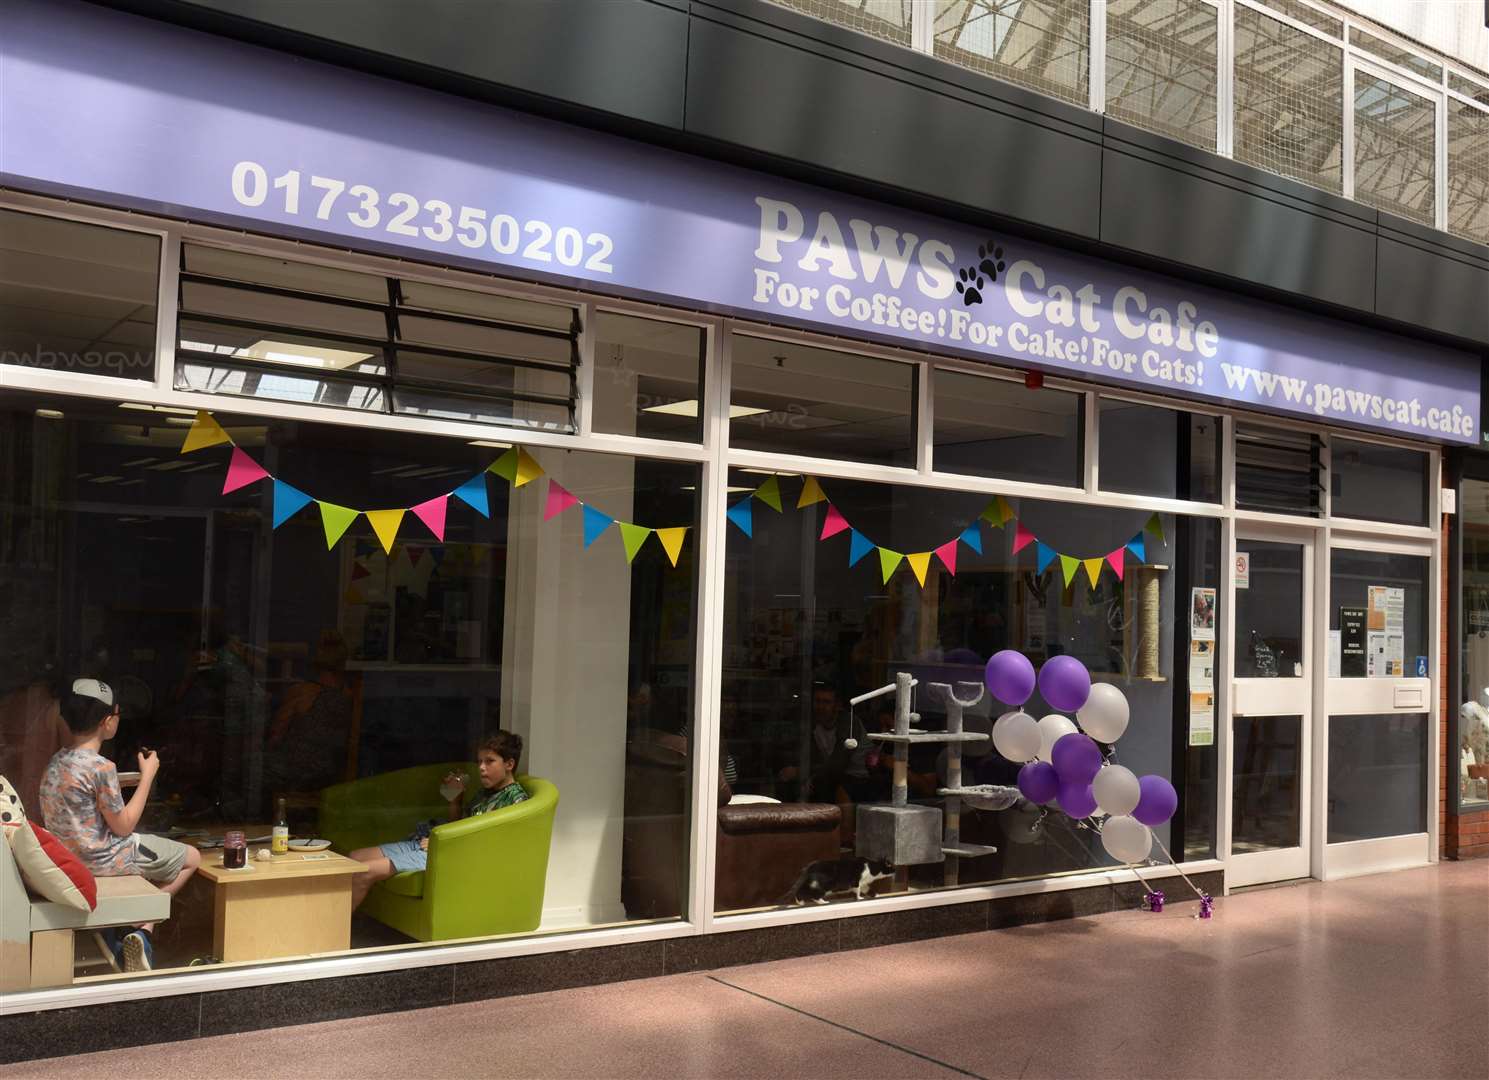 Paws the new cat cafe in Tonbridge High Street